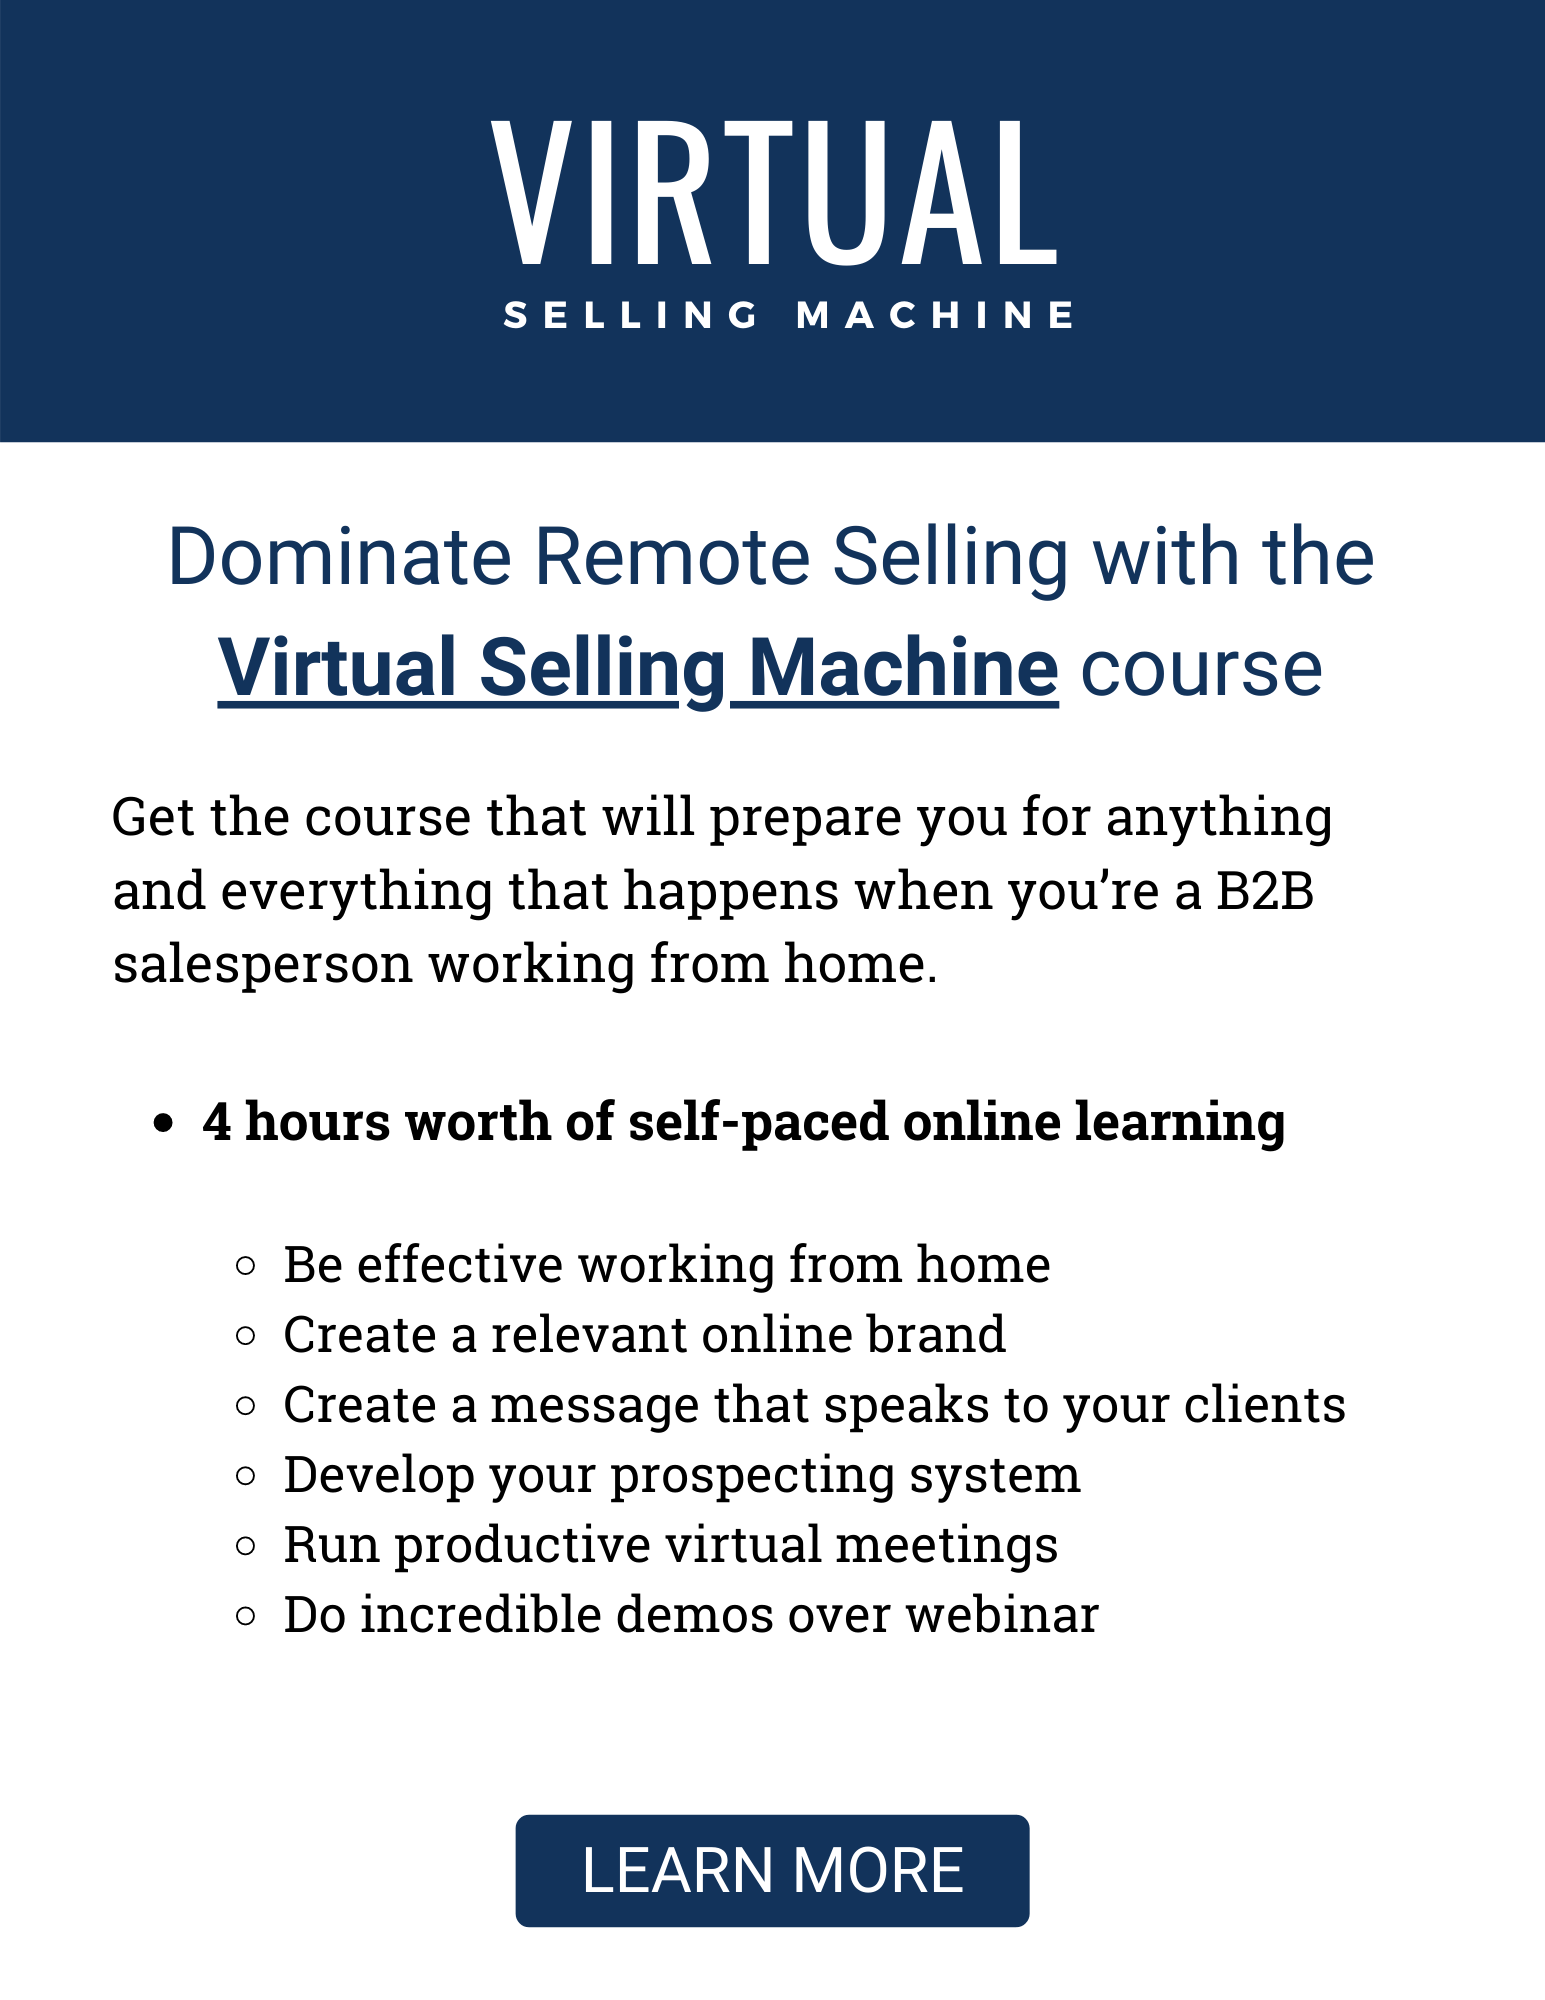 Dominate remote selling with the Virtual Selling Machine course from Modern Sales Training